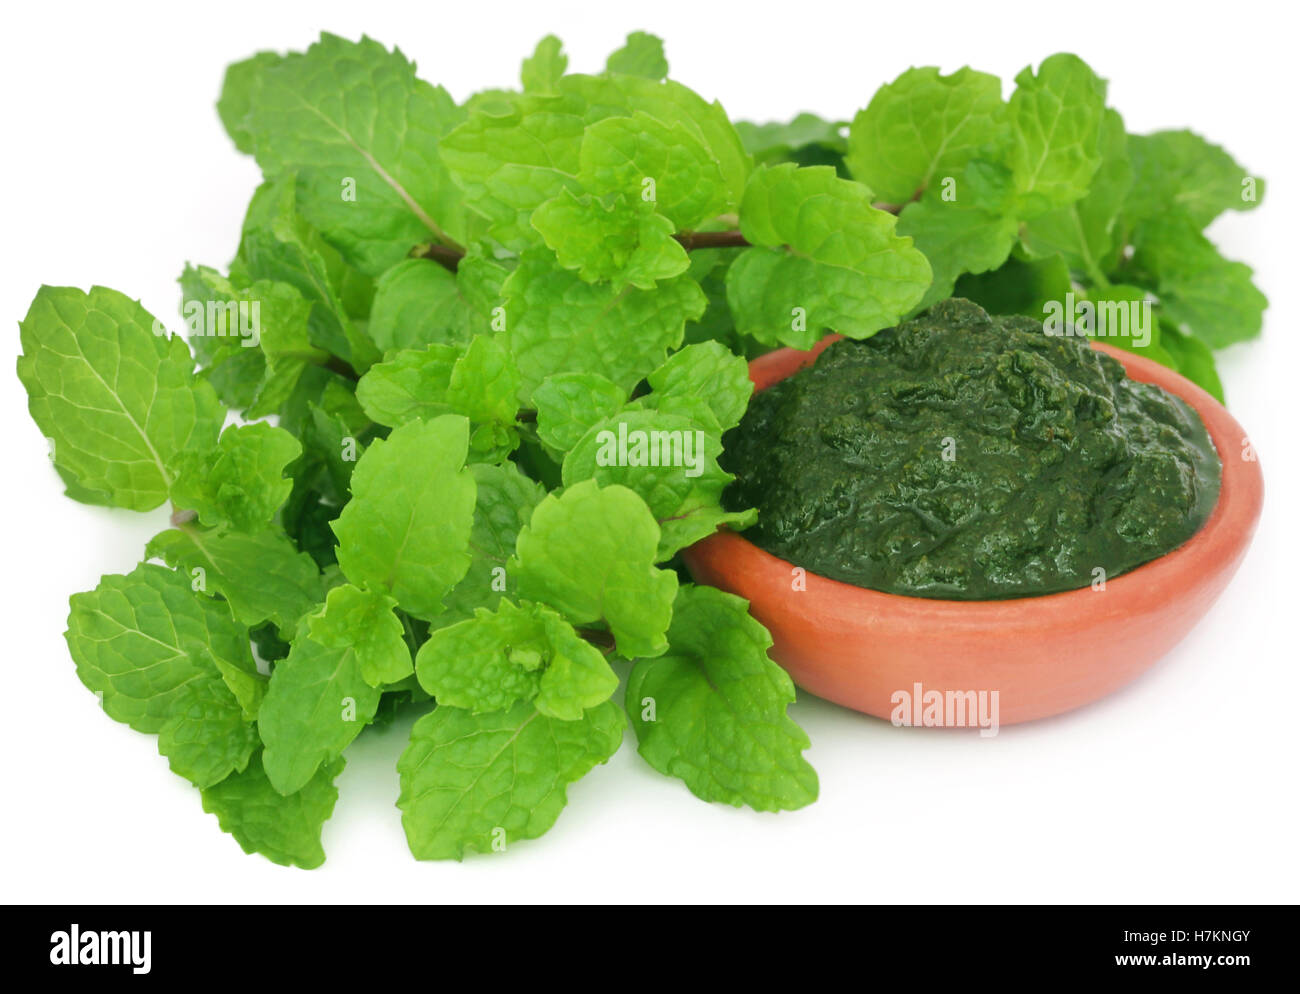 Bunch of mint leaves with ground paste in a pottery over white background Stock Photo